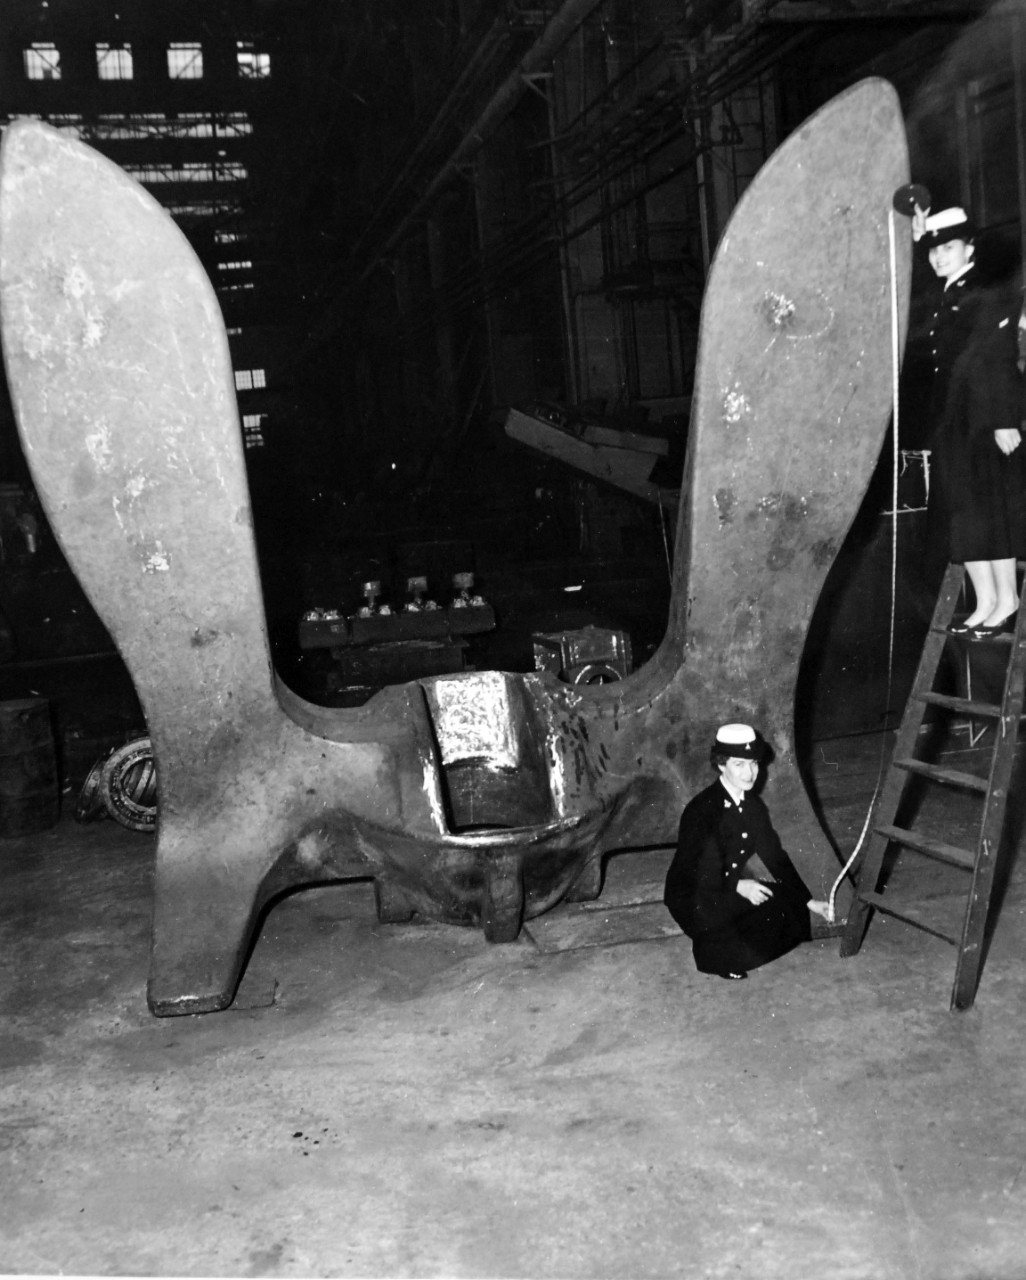 330-PS-6617 (USN 709159):   USS Forrestal (CVA-59) and USS Saratoga (CVA-60), 1954.   Blades of the largest anchor ever built by the U.S. Navy are measured at about 12 feet long by WAVES Storekeeper Seaman Frances Gand (kneeling) and Seaman Apprentice Iris Mae Bixby at the Norfolk Naval Shipyard Foundry, Portsmouth, Virginia.  Two of the 60,000-pound giants will be installed on the U.S. Navy’s latest aircraft carriers USS Forrestal and USS Saratoga.  Overall length of the anchors when shafts are attached will be about 22 feet.   Photograph released March 30, 1954.   Official U.S. Navy Photograph, now in the collections of the National Archives.  (2015/4/7).  